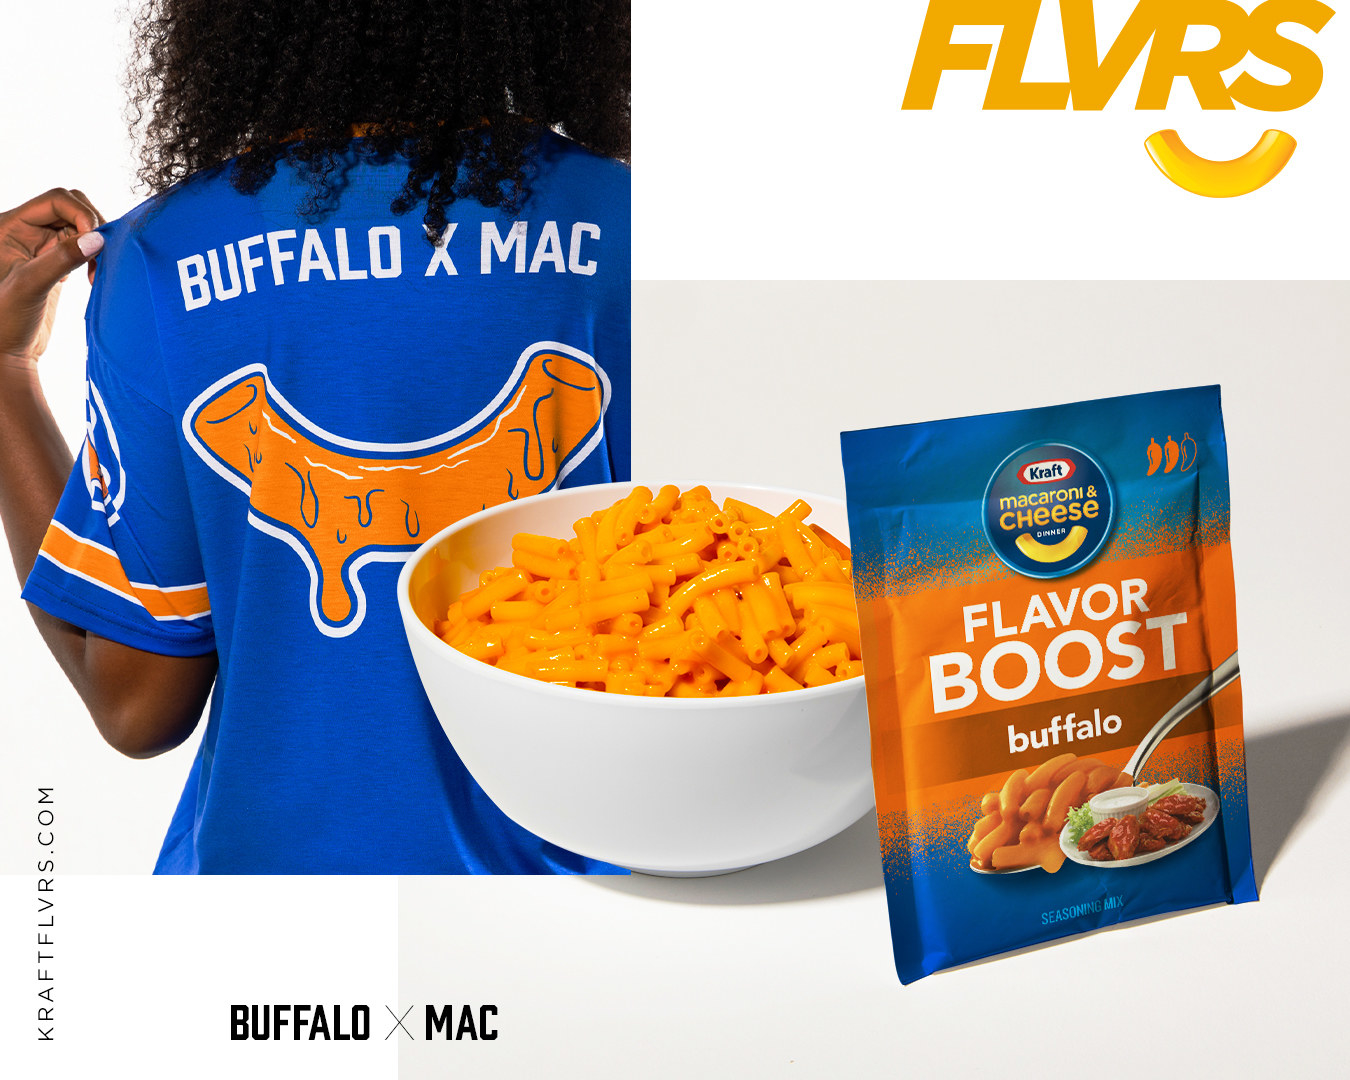 A buffalo x mac jersey and the flavor boost packet